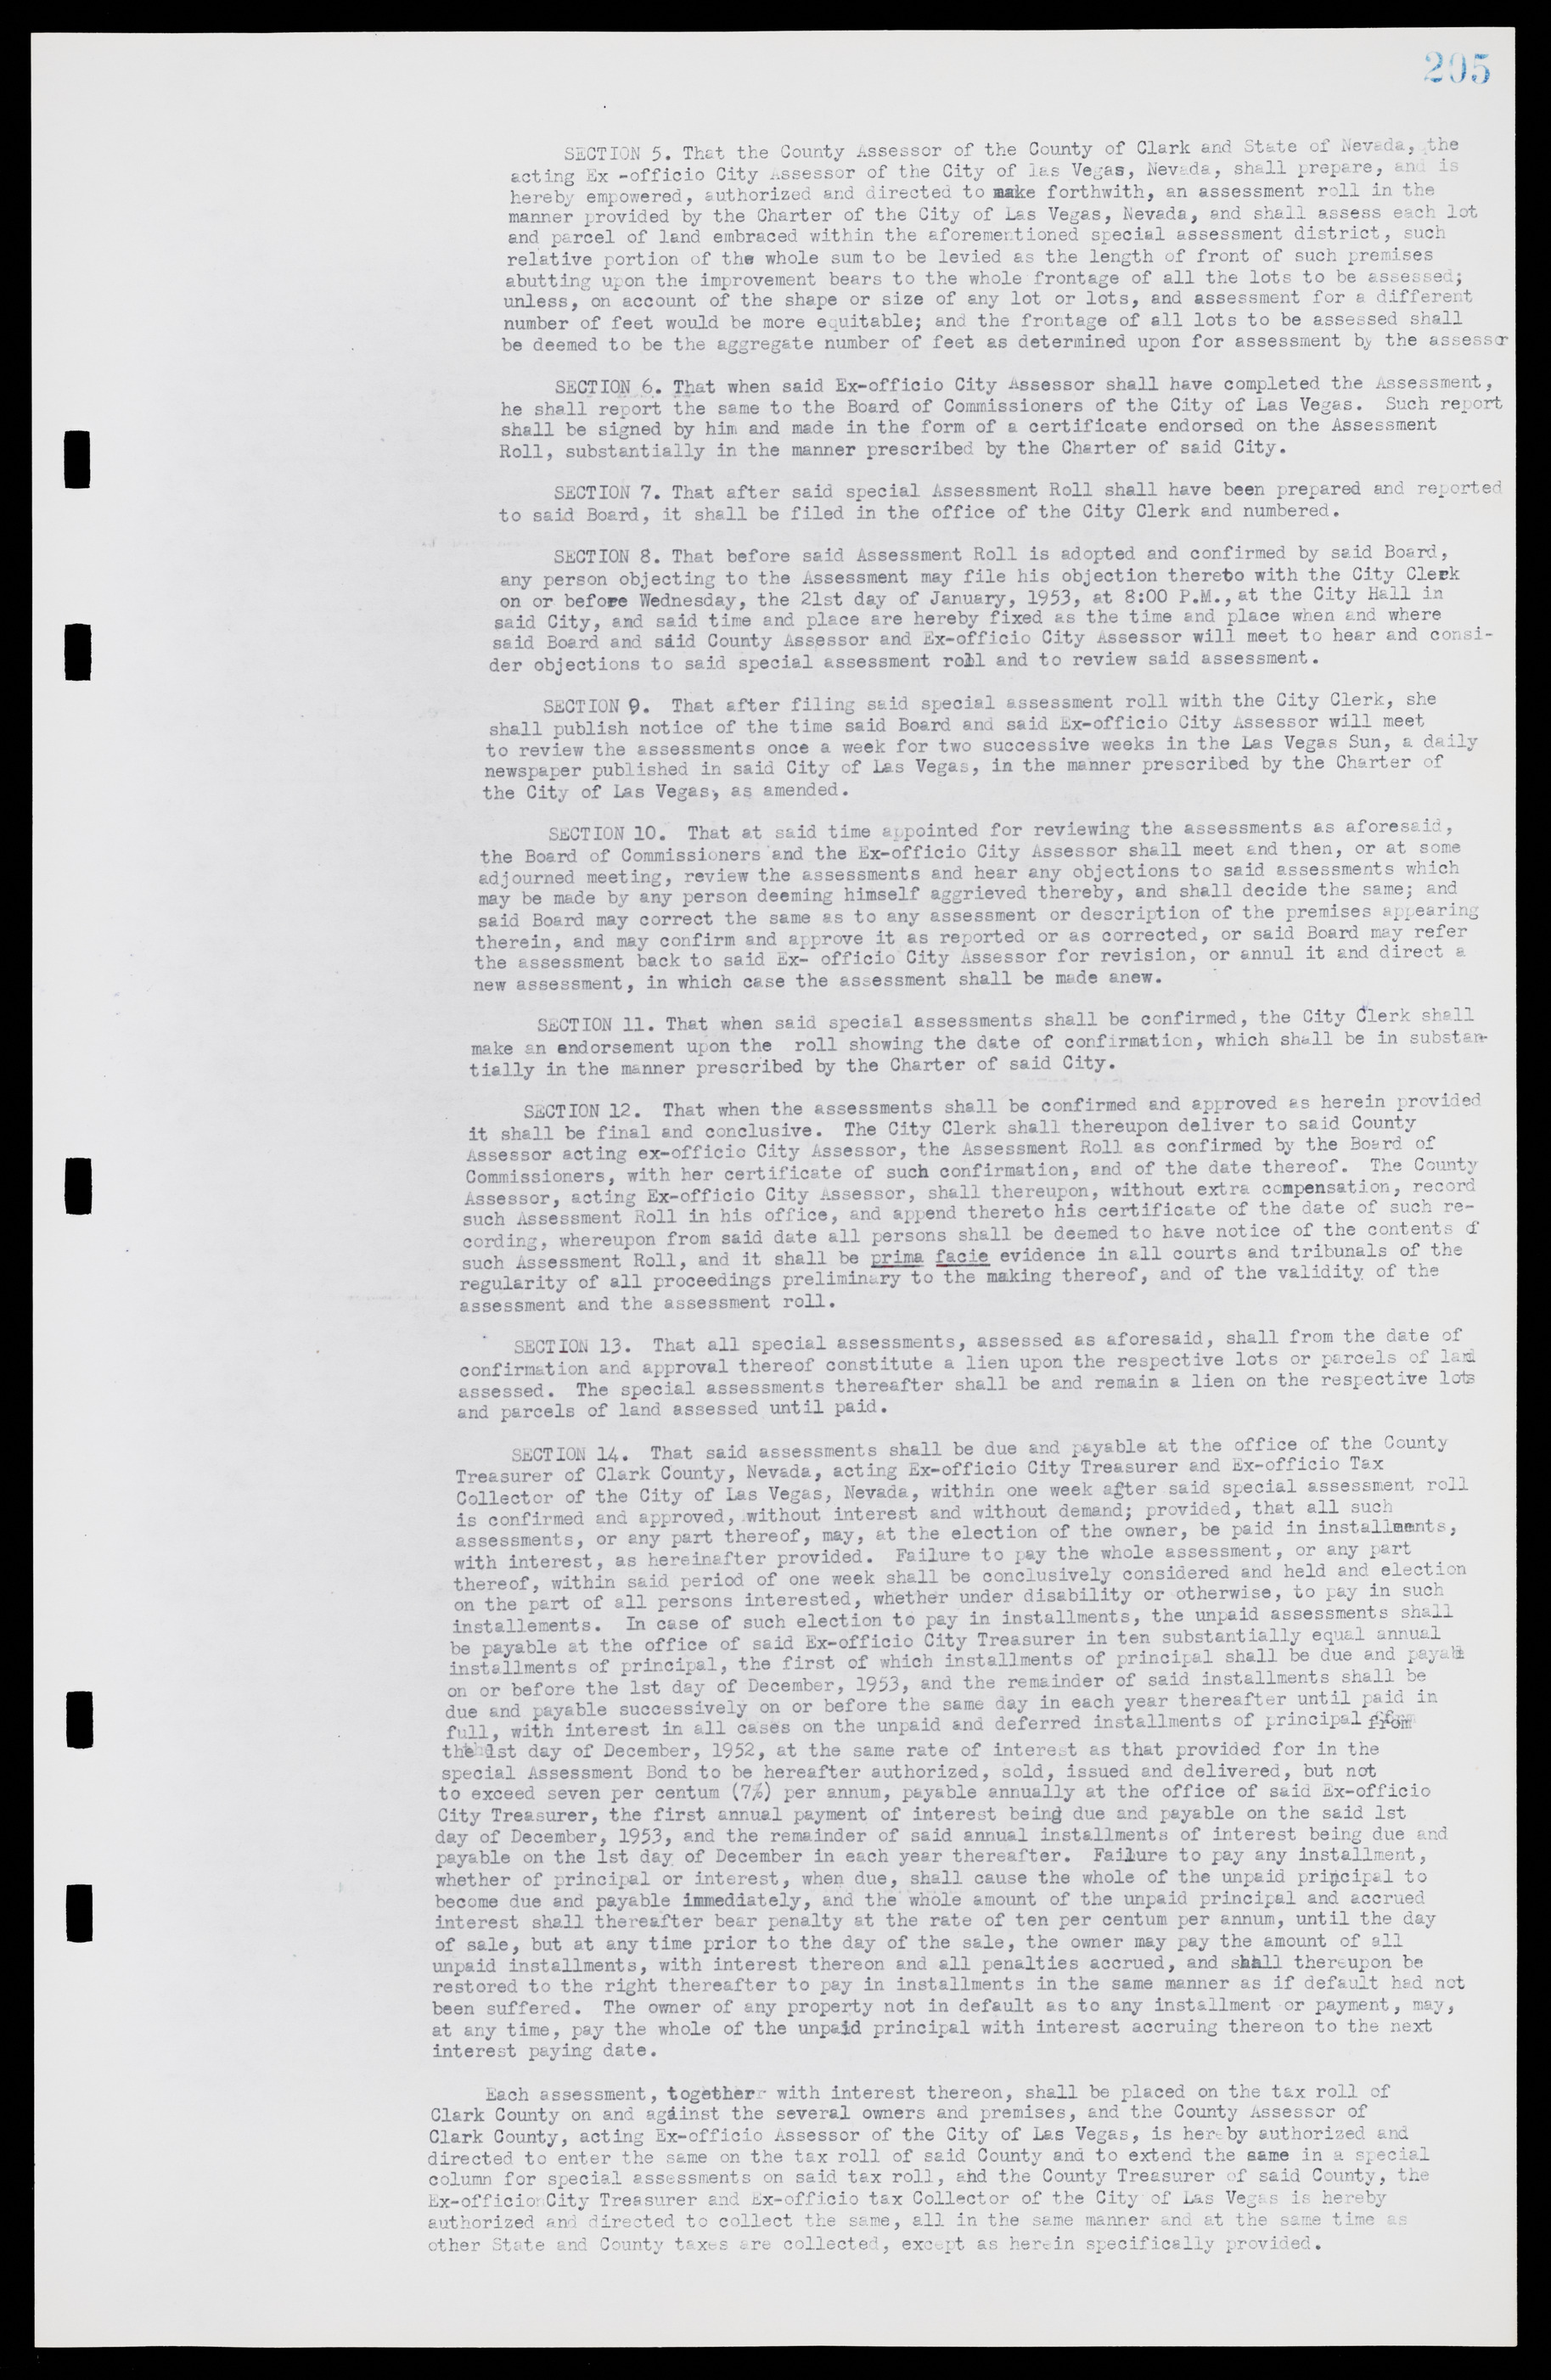 Las Vegas City Commission Minutes, May 26, 1952 to February 17, 1954, lvc000008-219